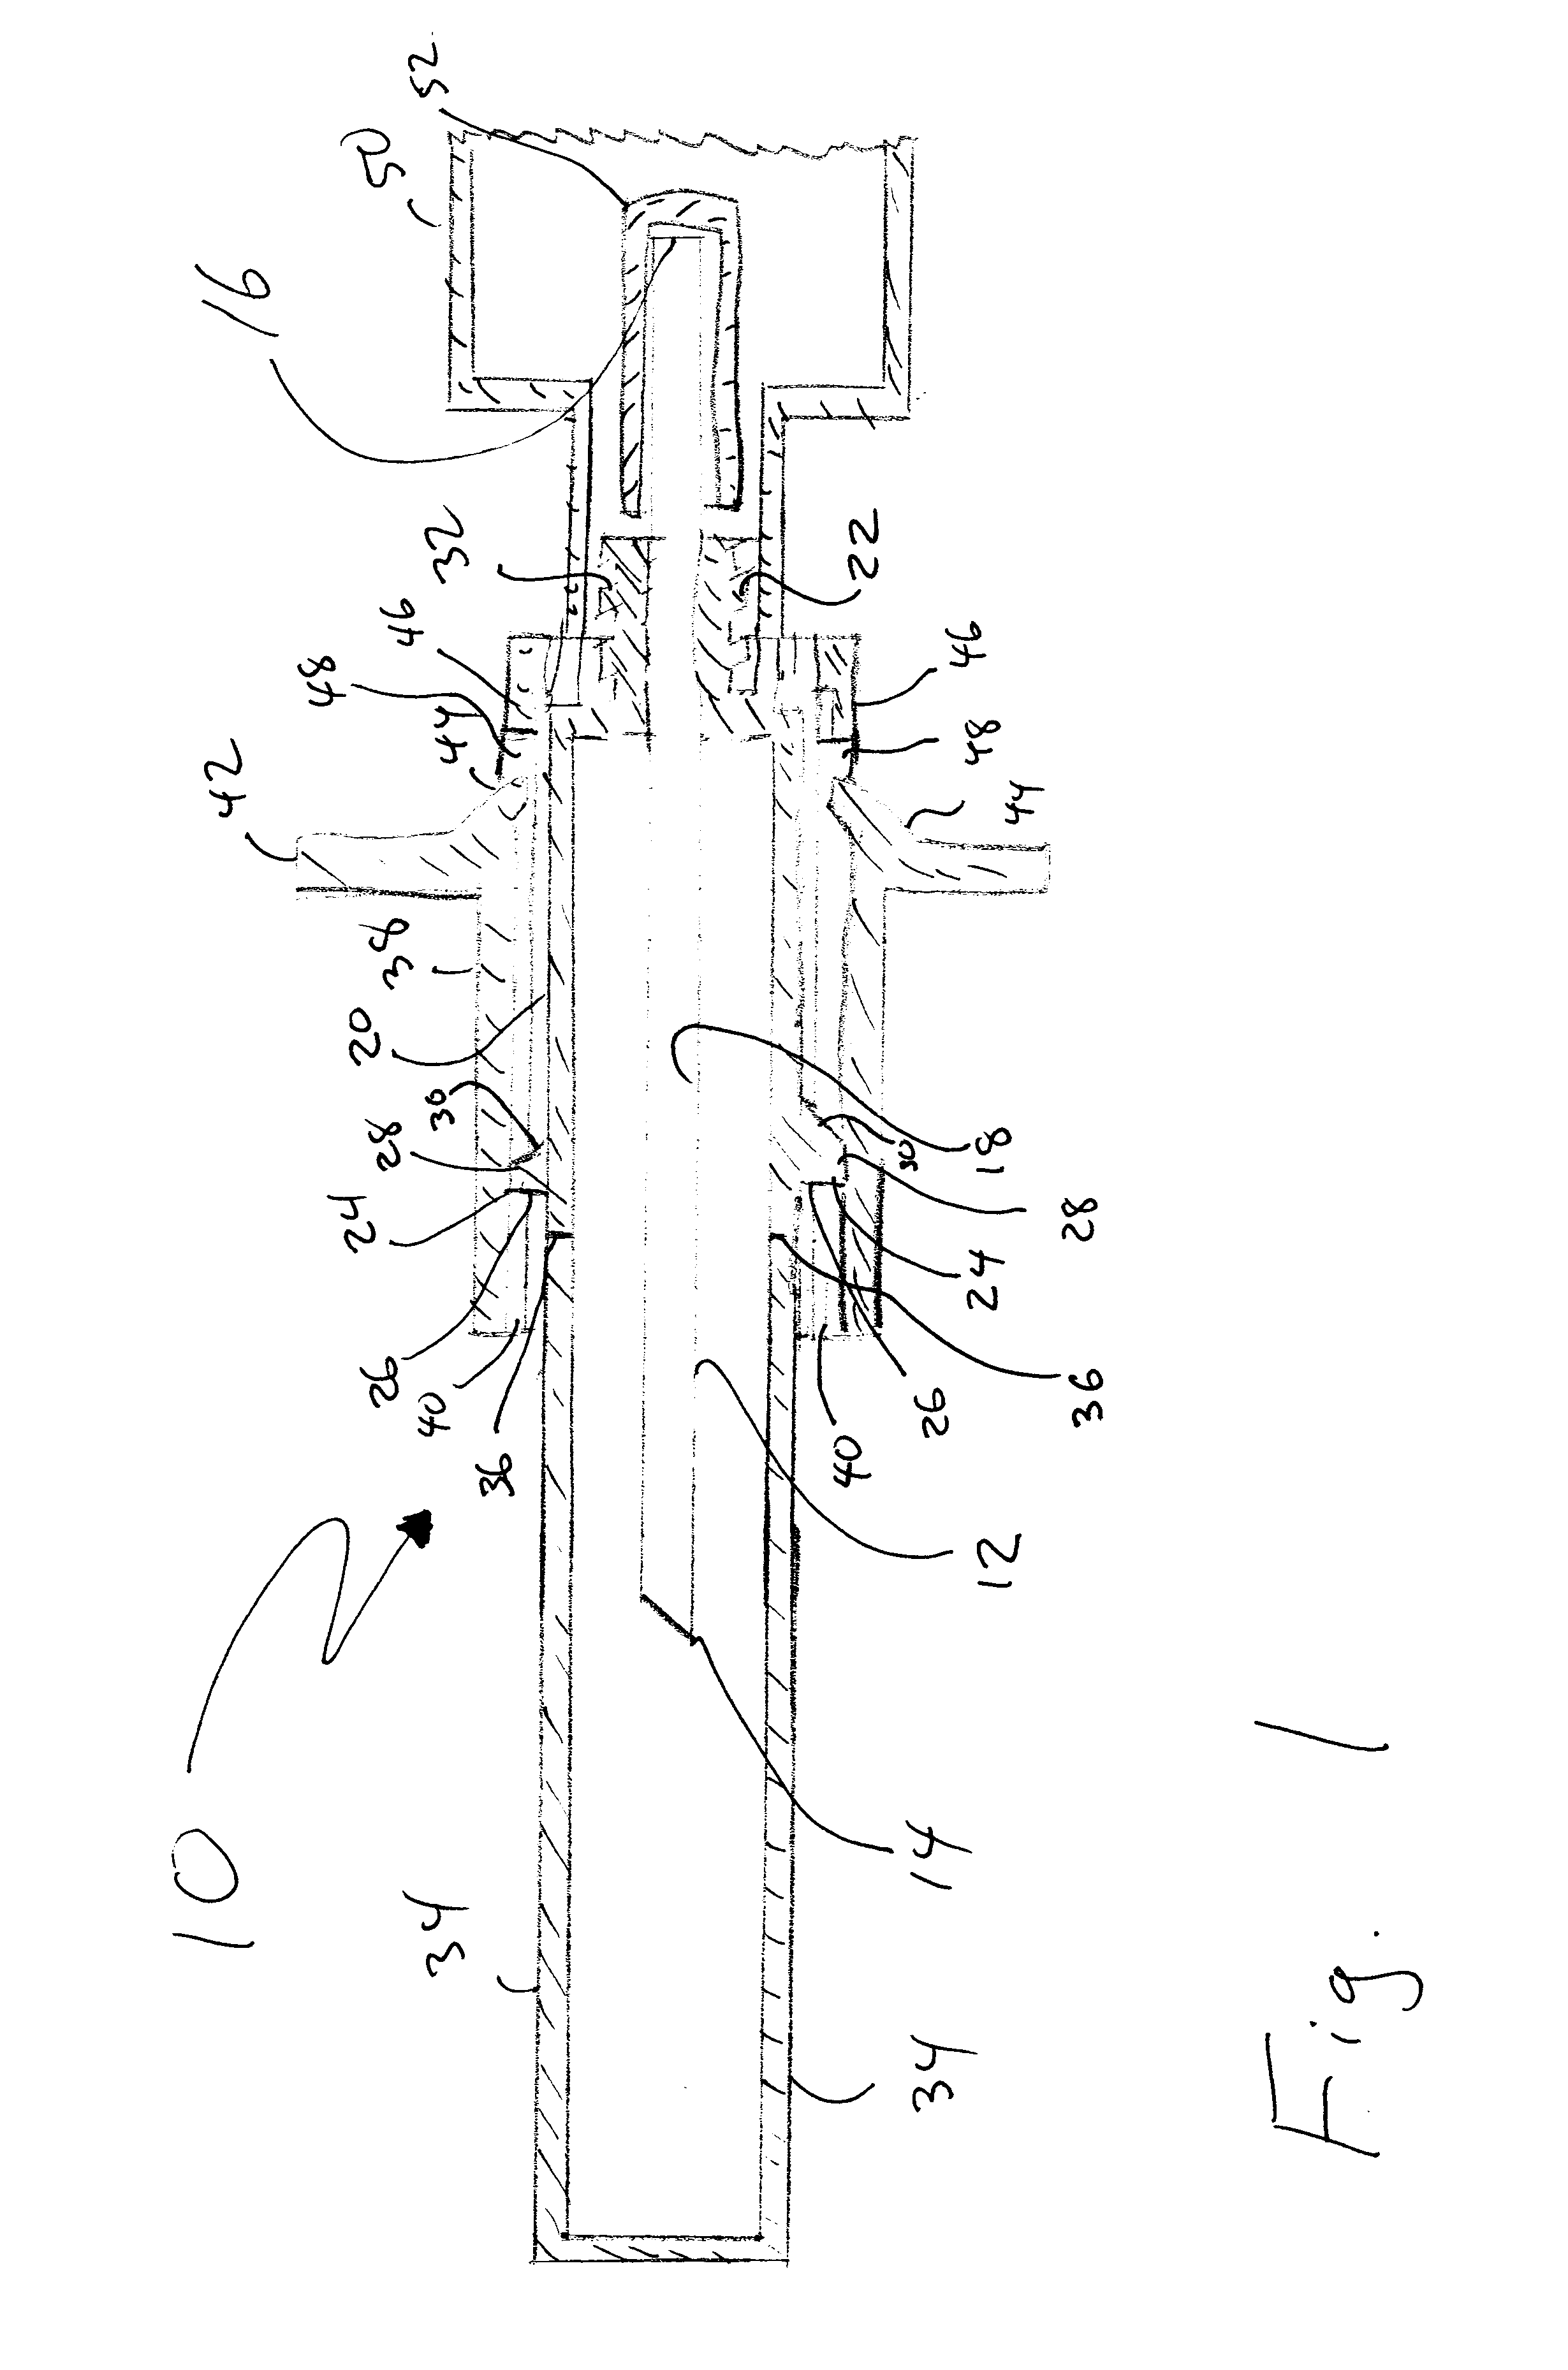 Needle protective assembly for multi-draw needle